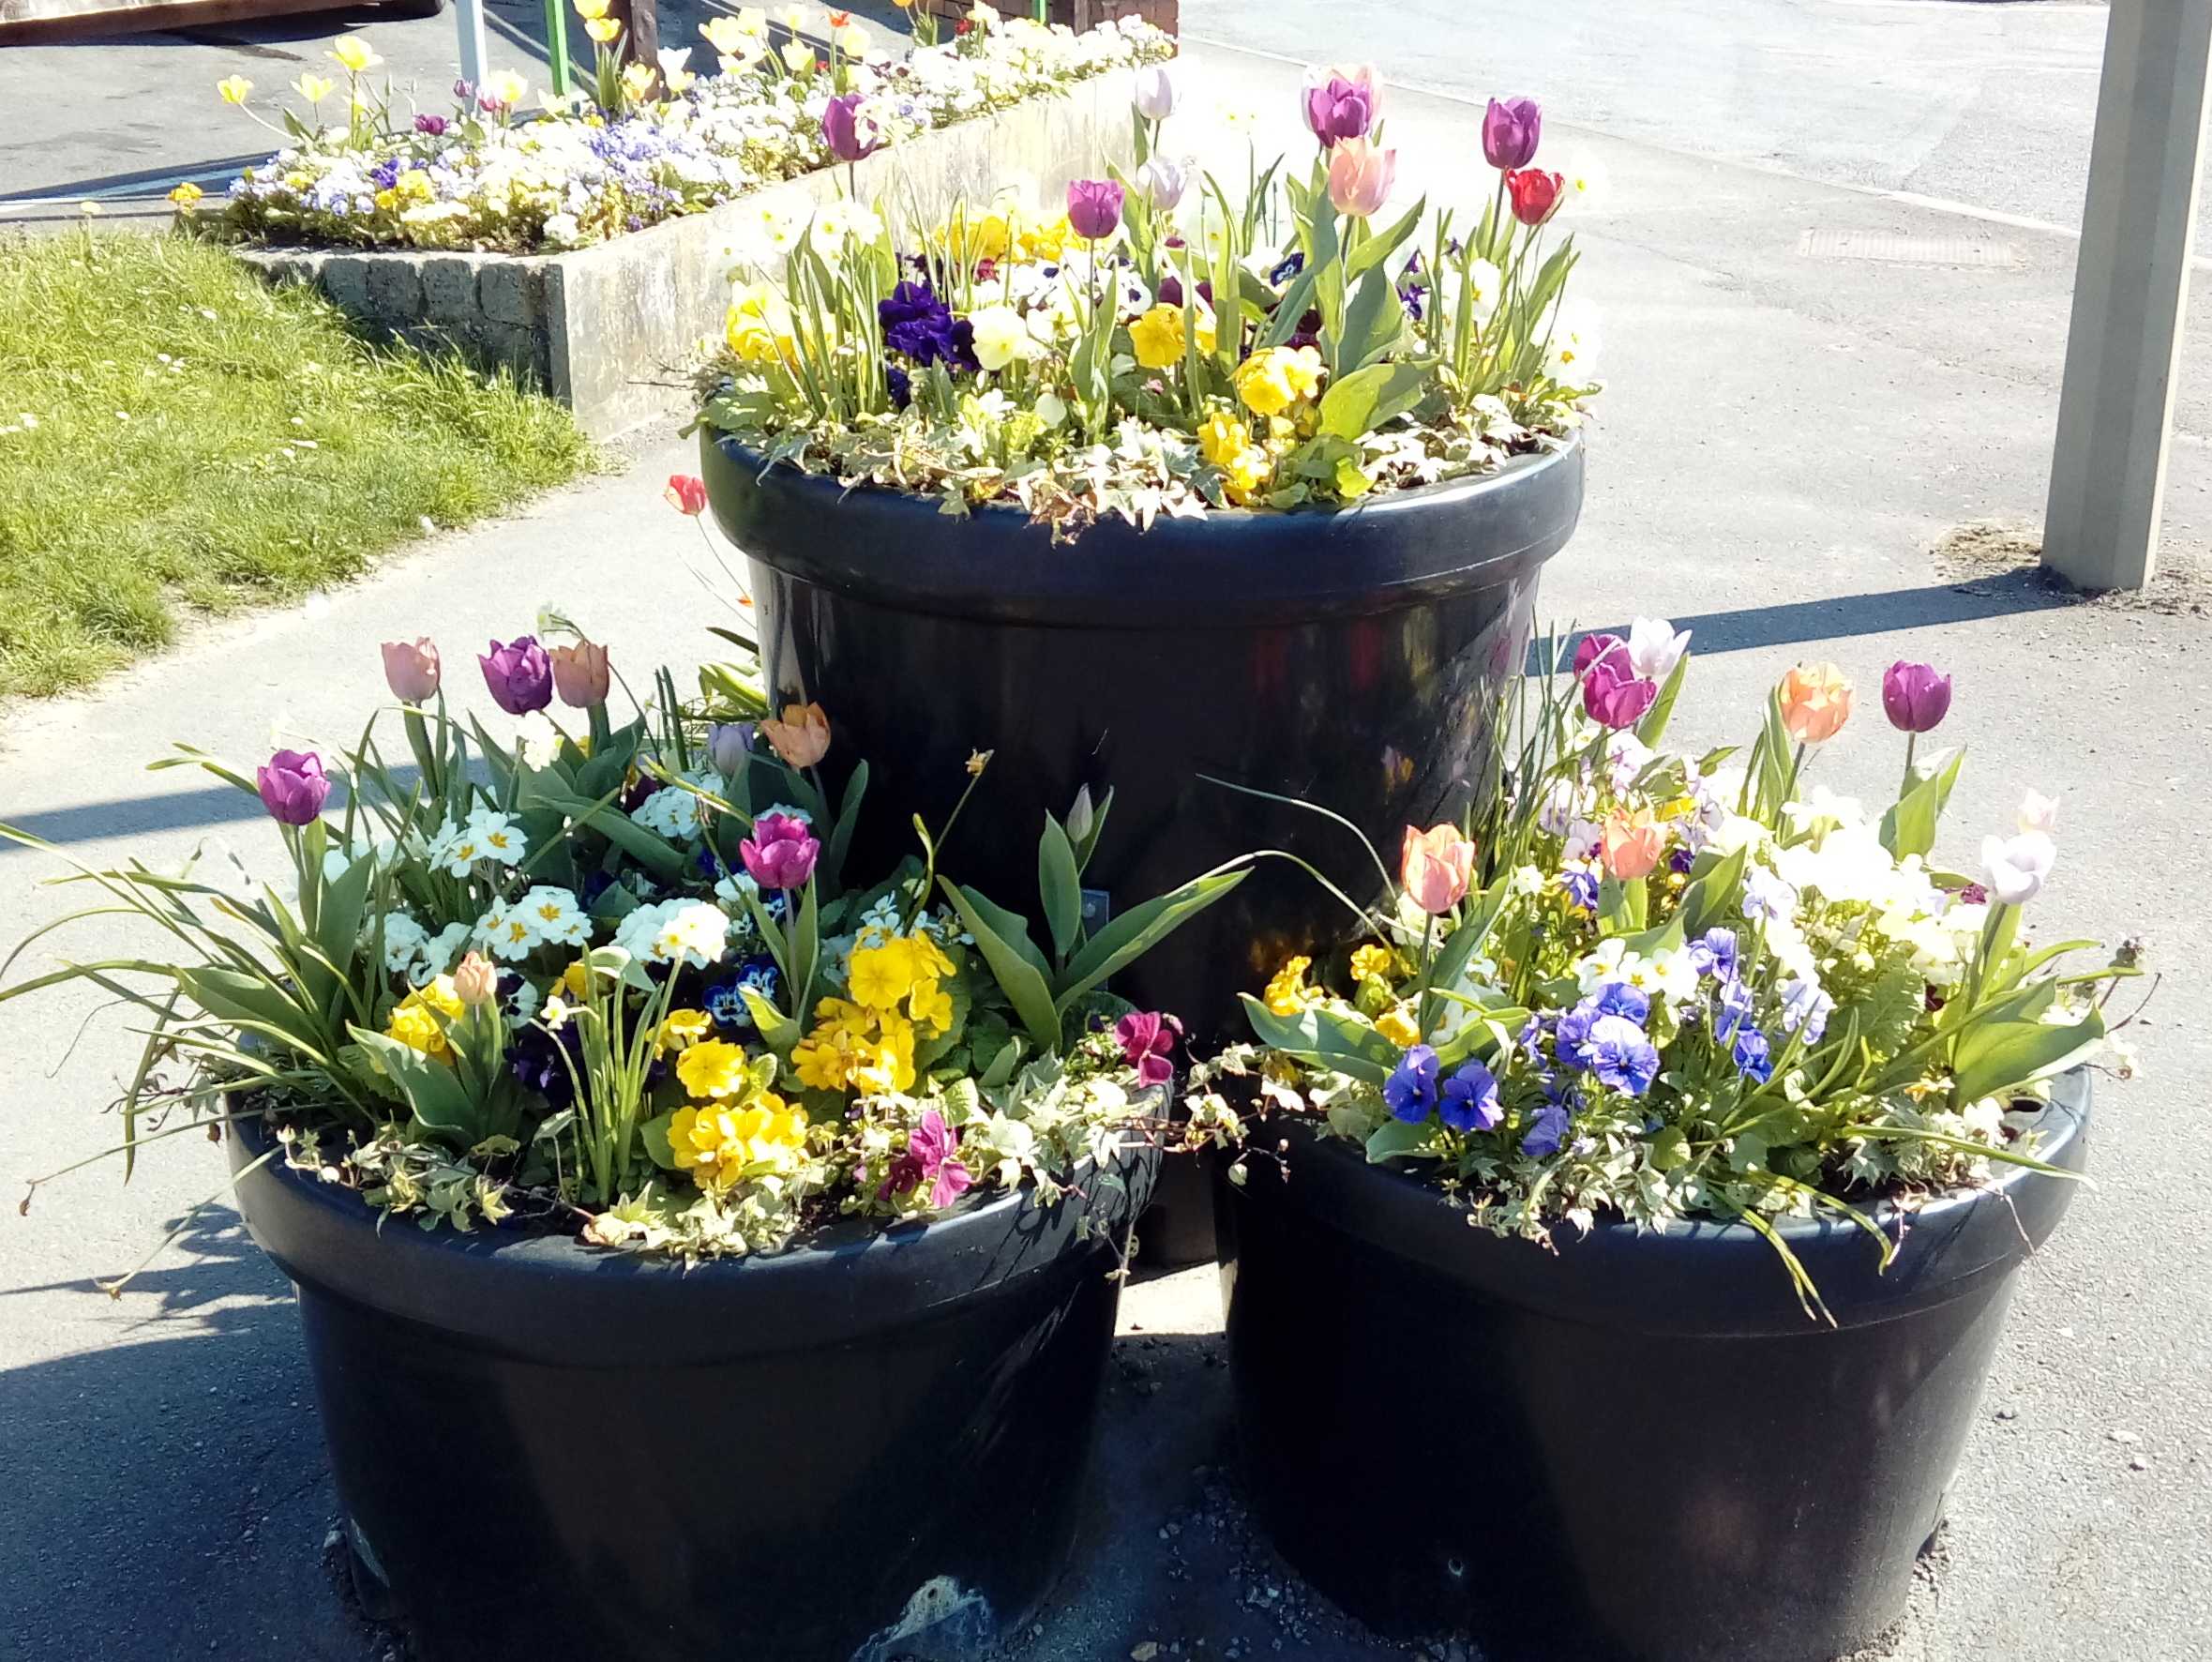 3 baskets of purple and cream and pink tulips